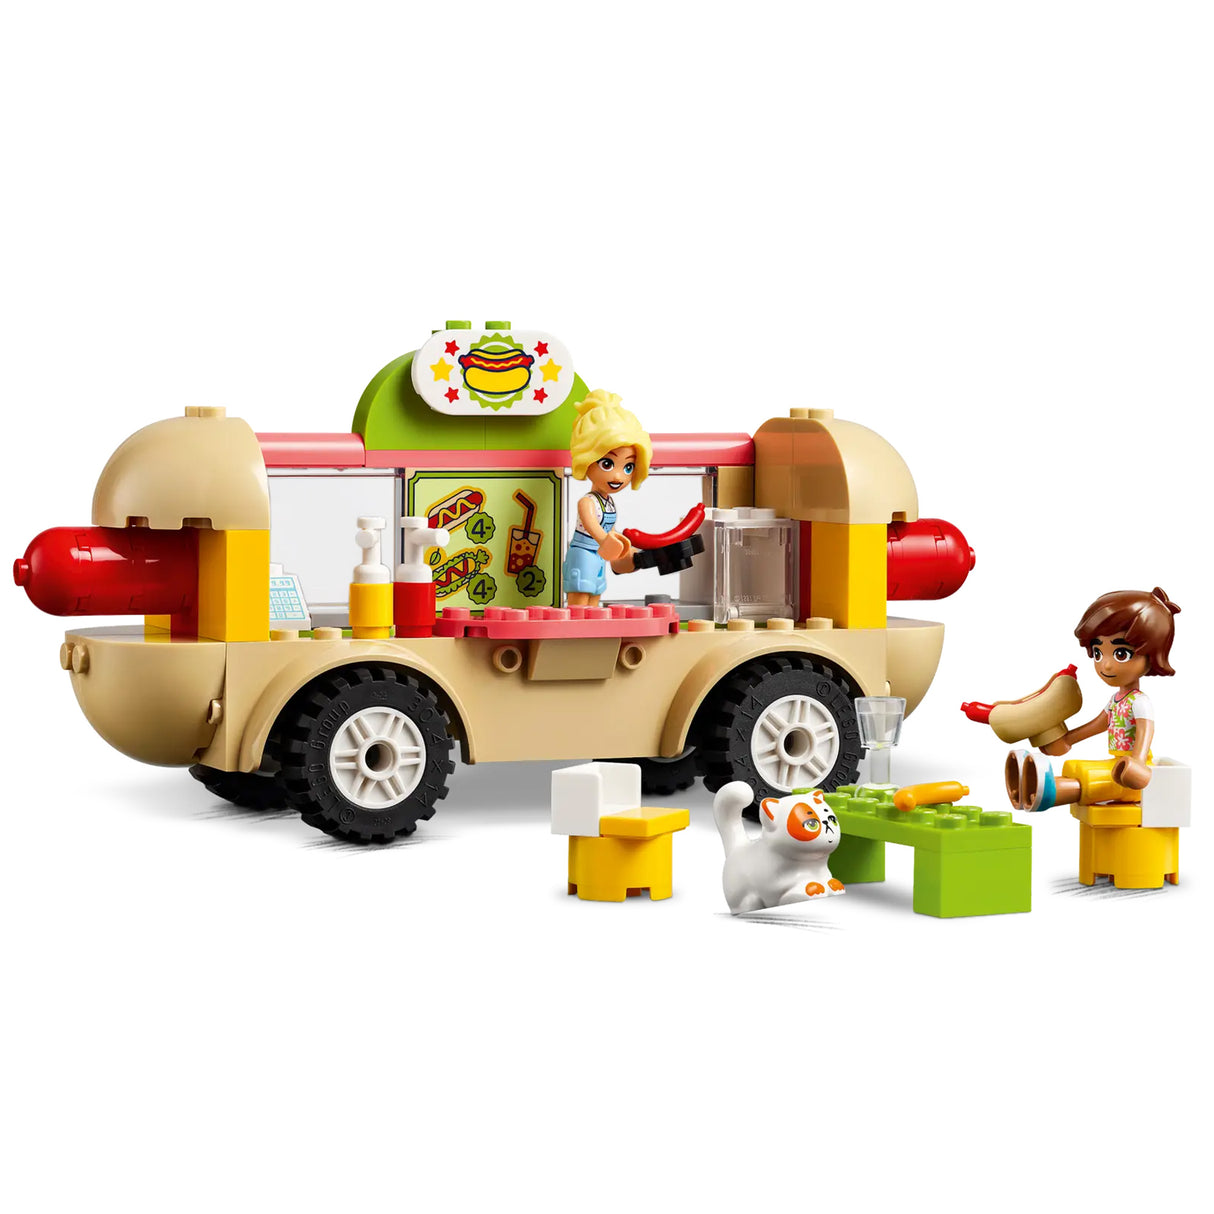 LEGO Friends Hot Dog Food Truck 42633, (100-pieces)